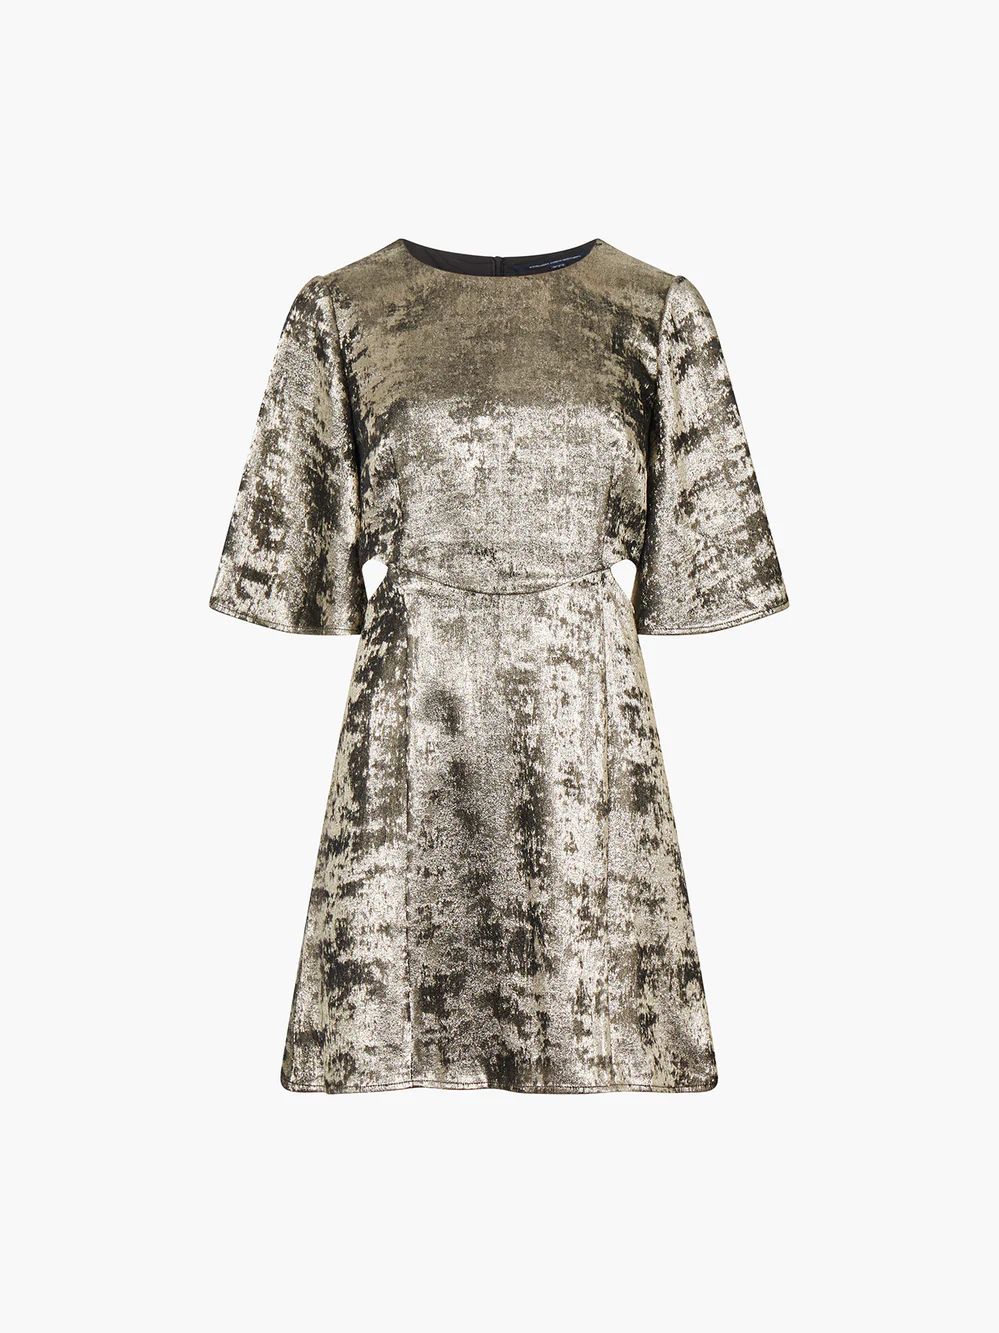 Alara Metallic Cut Out Mini Dress | French Connection (US)